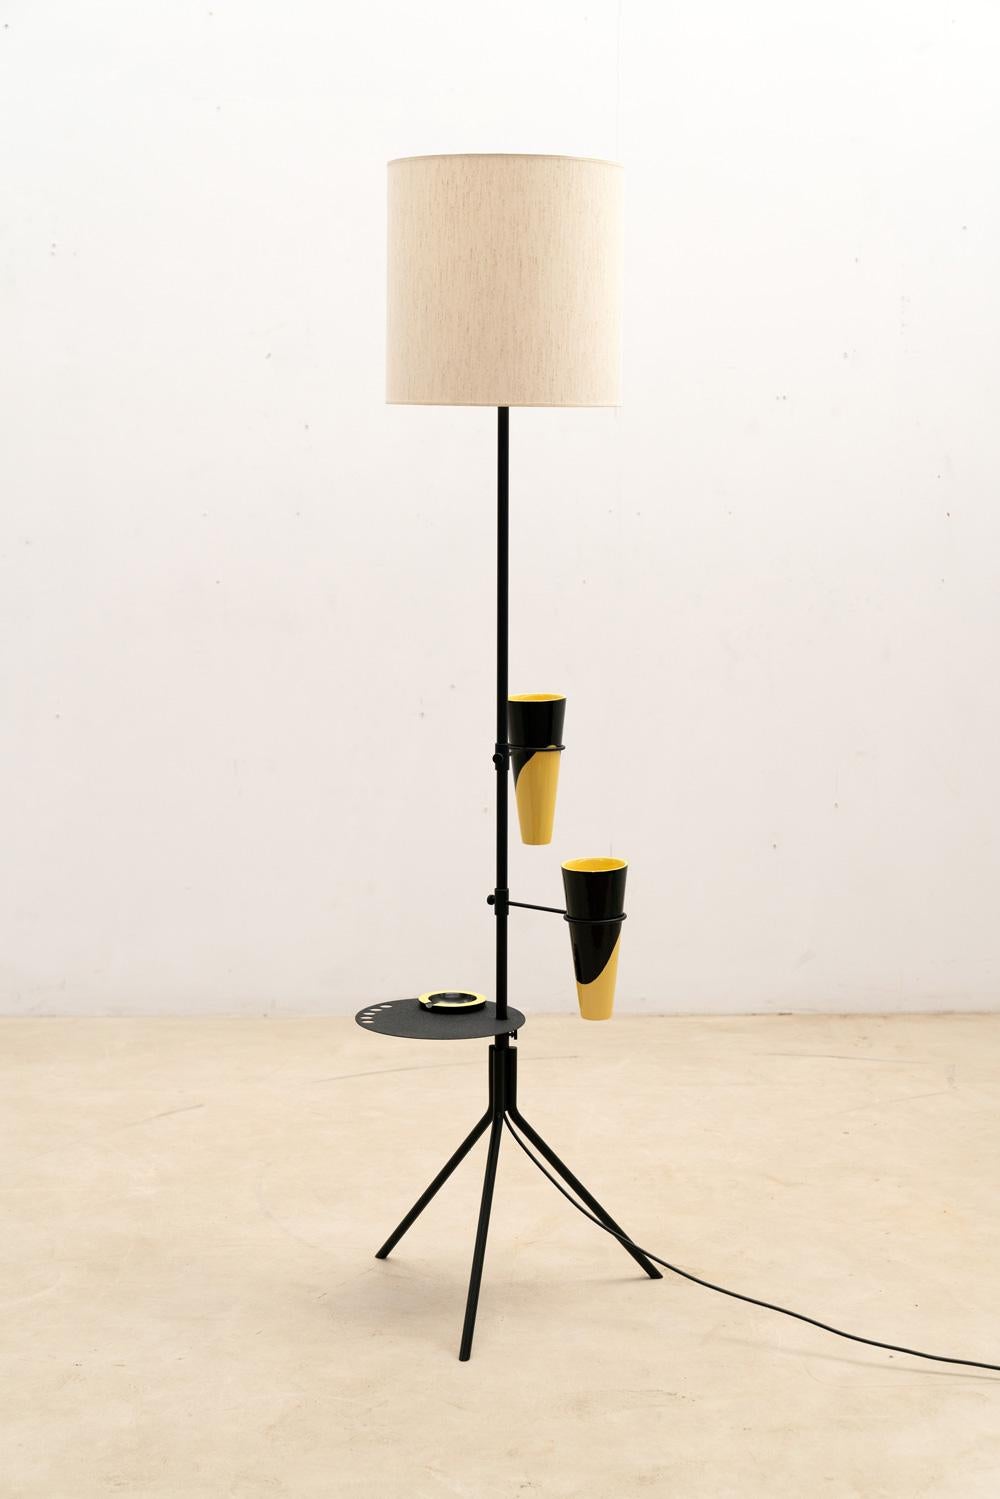 Metal and ceramic tripod Floor Lamp: a discovery from the 1960s. 
Featuring a metal tripod base, this lamp boasts two plant holders or cups and an ashtray holder crafted in black and yellow ceramic. 
Adjustable vertically and horizontally.

Nice